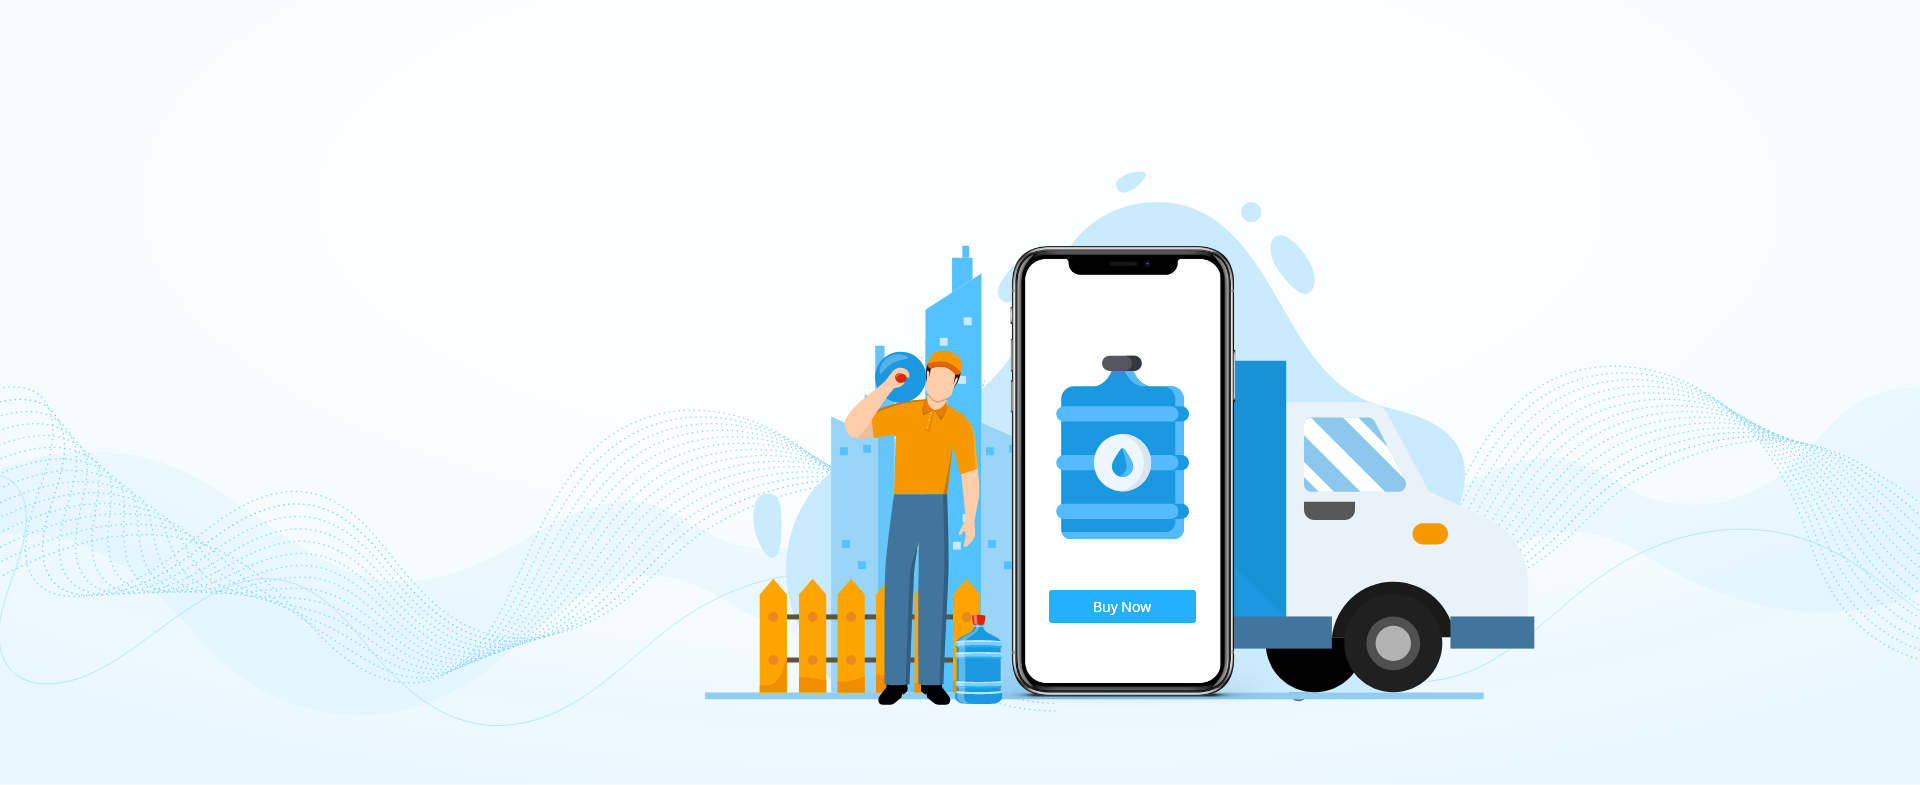 Water Delivery Business Software